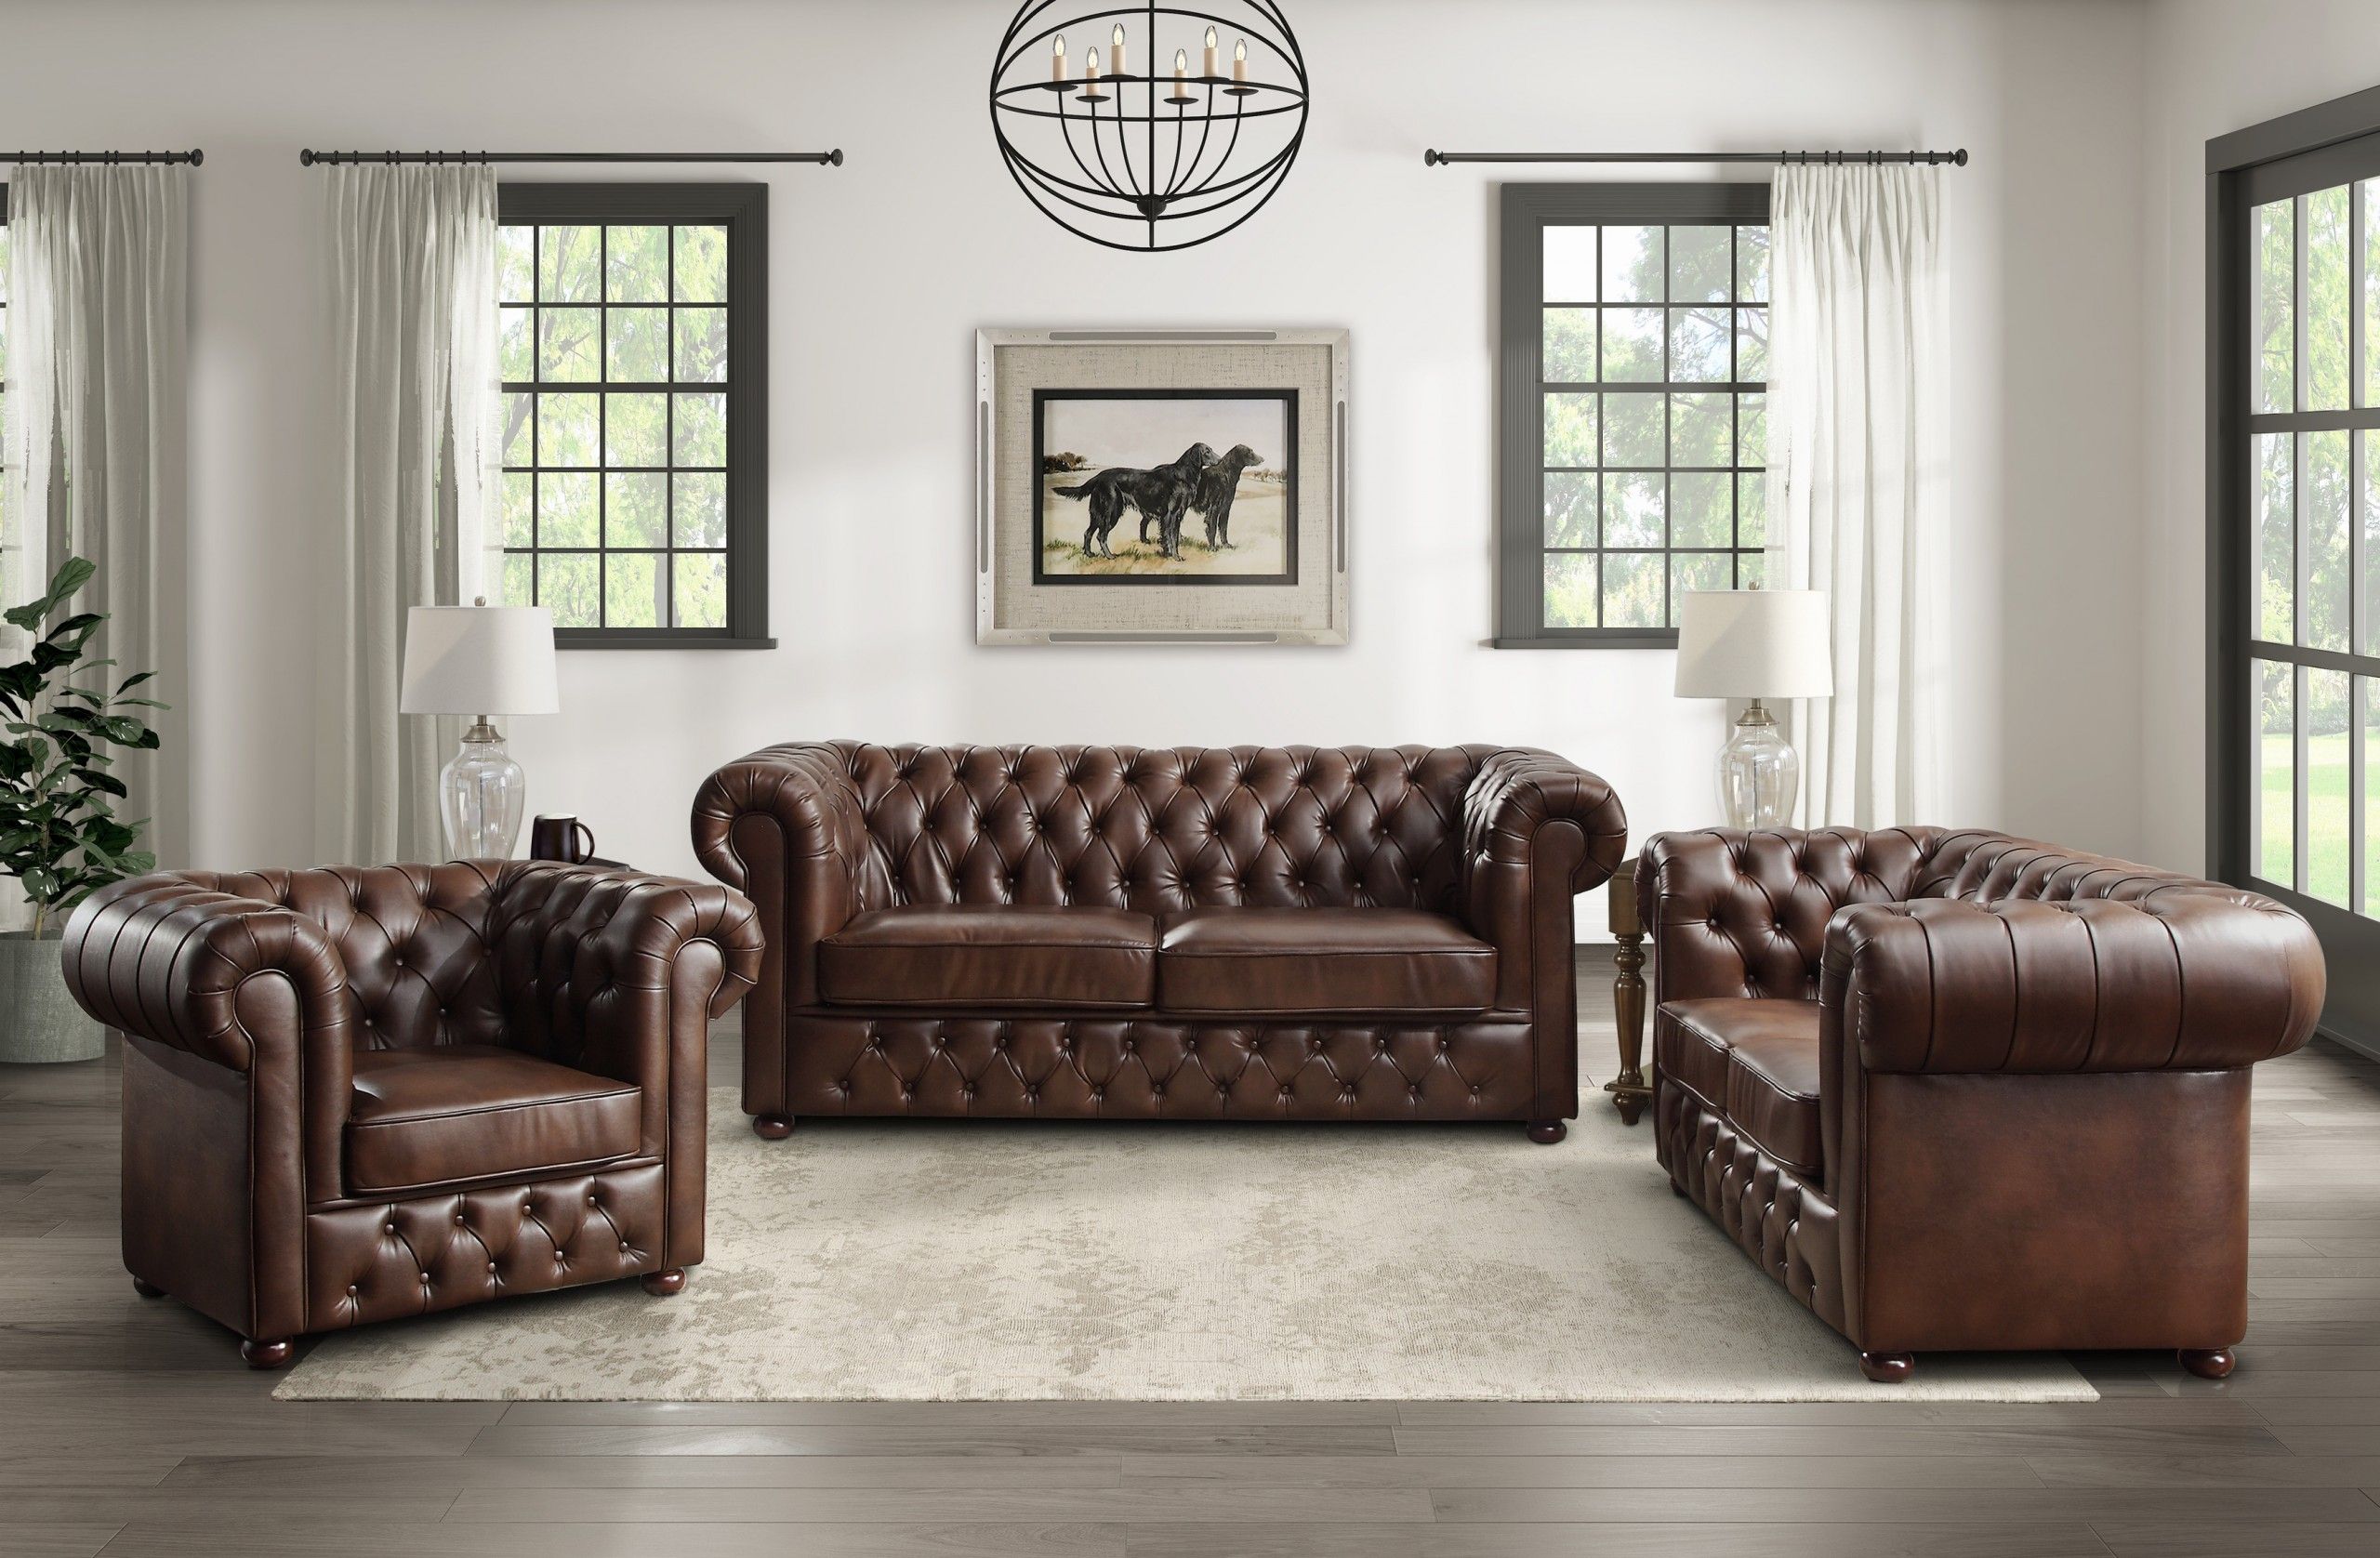 Faux Leather Chesterfield Sofa In Brown Finish – Oc Homestyle Furniture Pertaining To Faux Leather Sofas In Dark Brown (View 5 of 15)